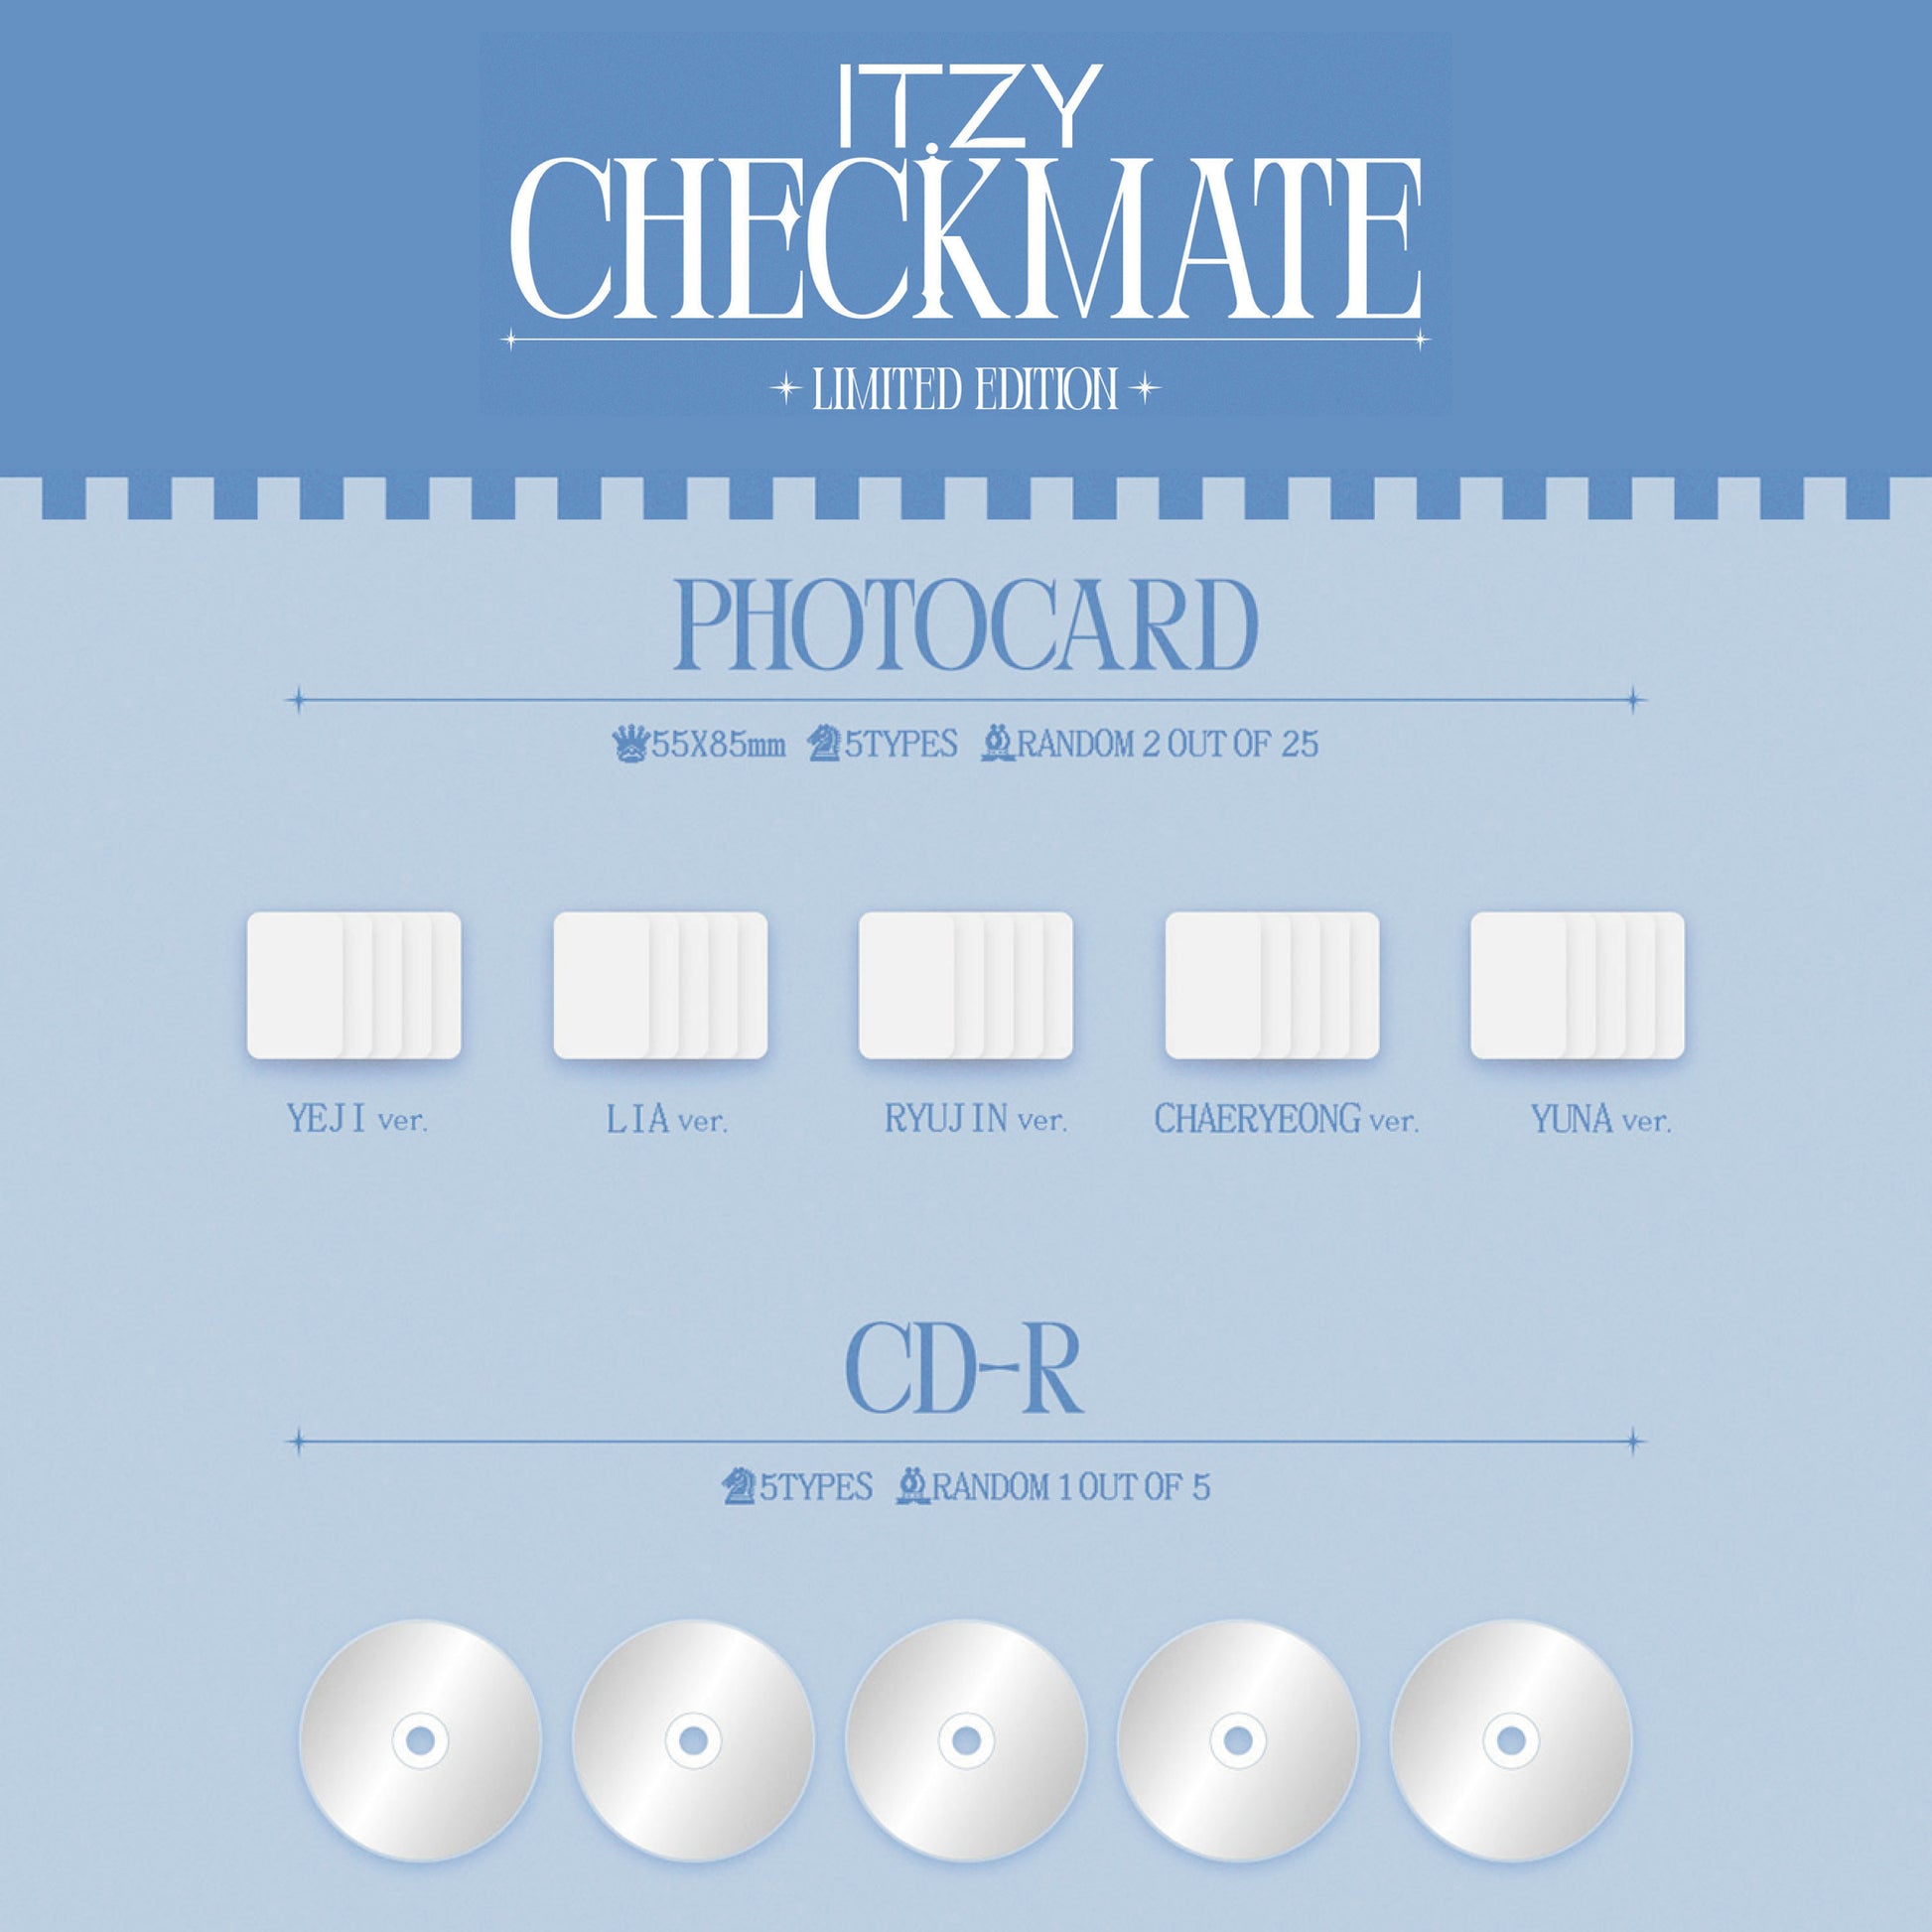 ITZY - CHECKMATE (STANDARD EDITION) - Random / with extra photo card